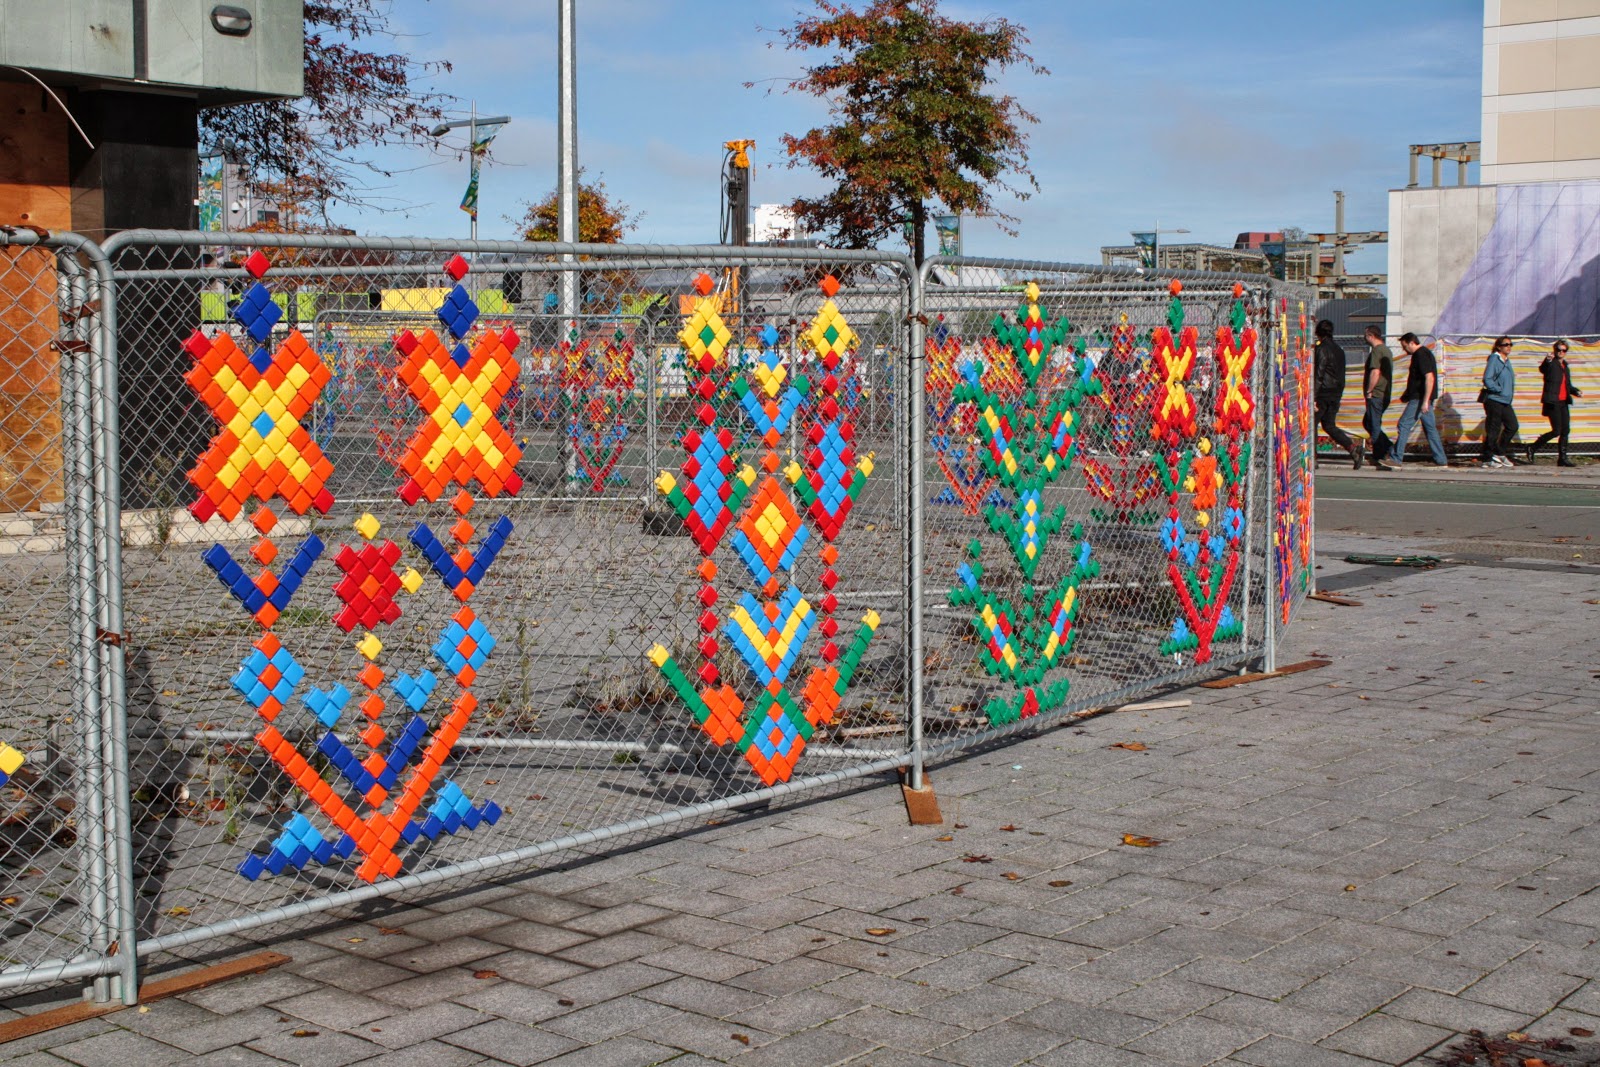 Plastic thingies stuck into hurricane fencing in the shape of flowers.